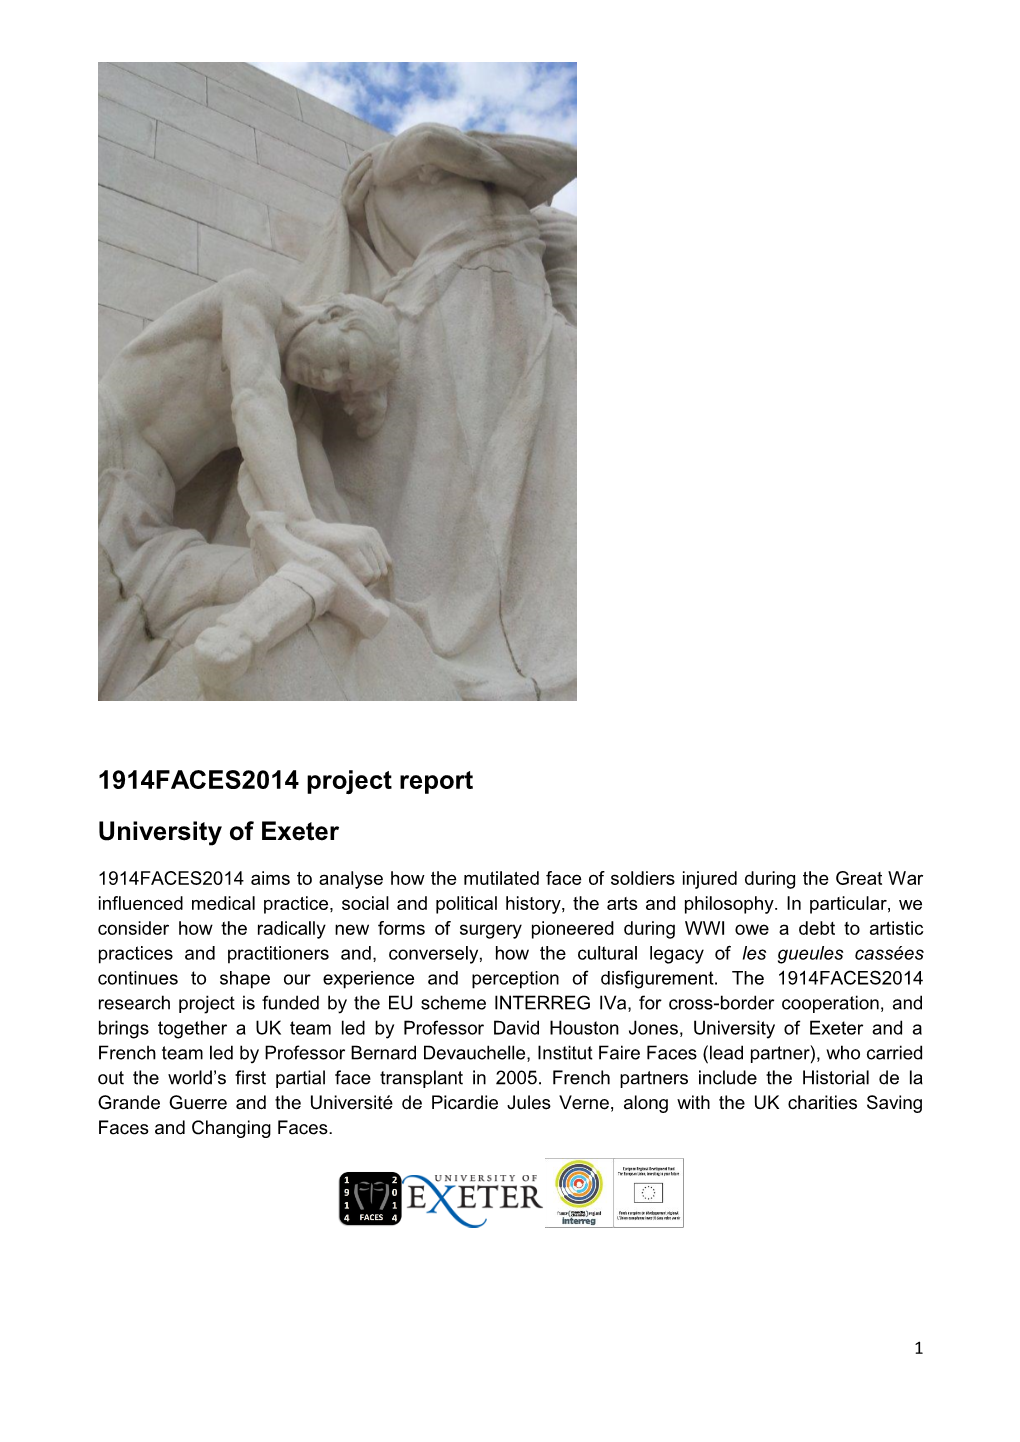 1914FACES2014 Project Report University of Exeter